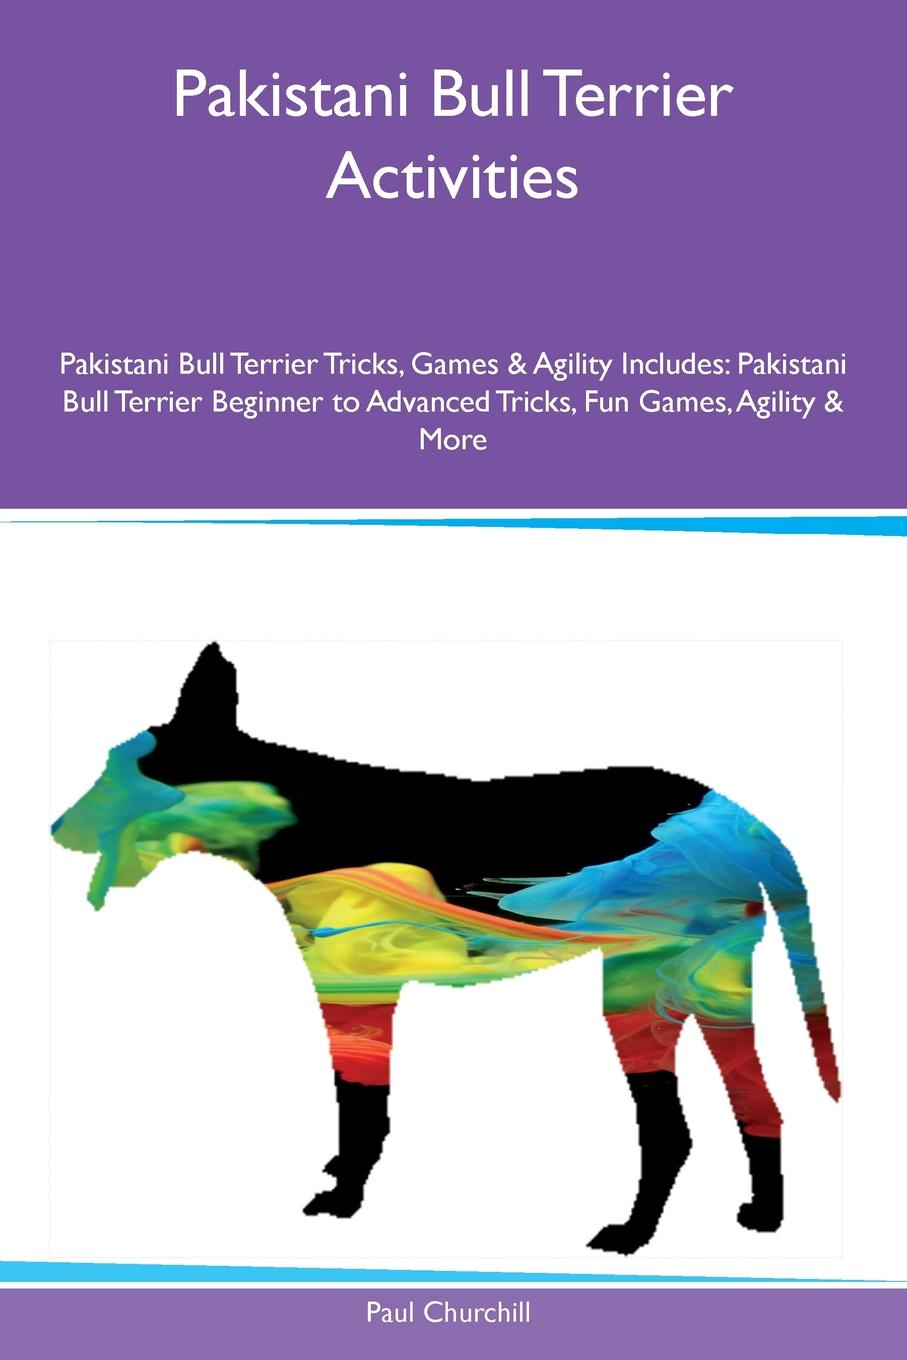 Pakistani Bull Terrier Activities Pakistani Bull Terrier Tricks, Games & Agility Includes. Pakistani Bull Terrier Beginner to Advanced Tricks, Fun Games, Agility & More